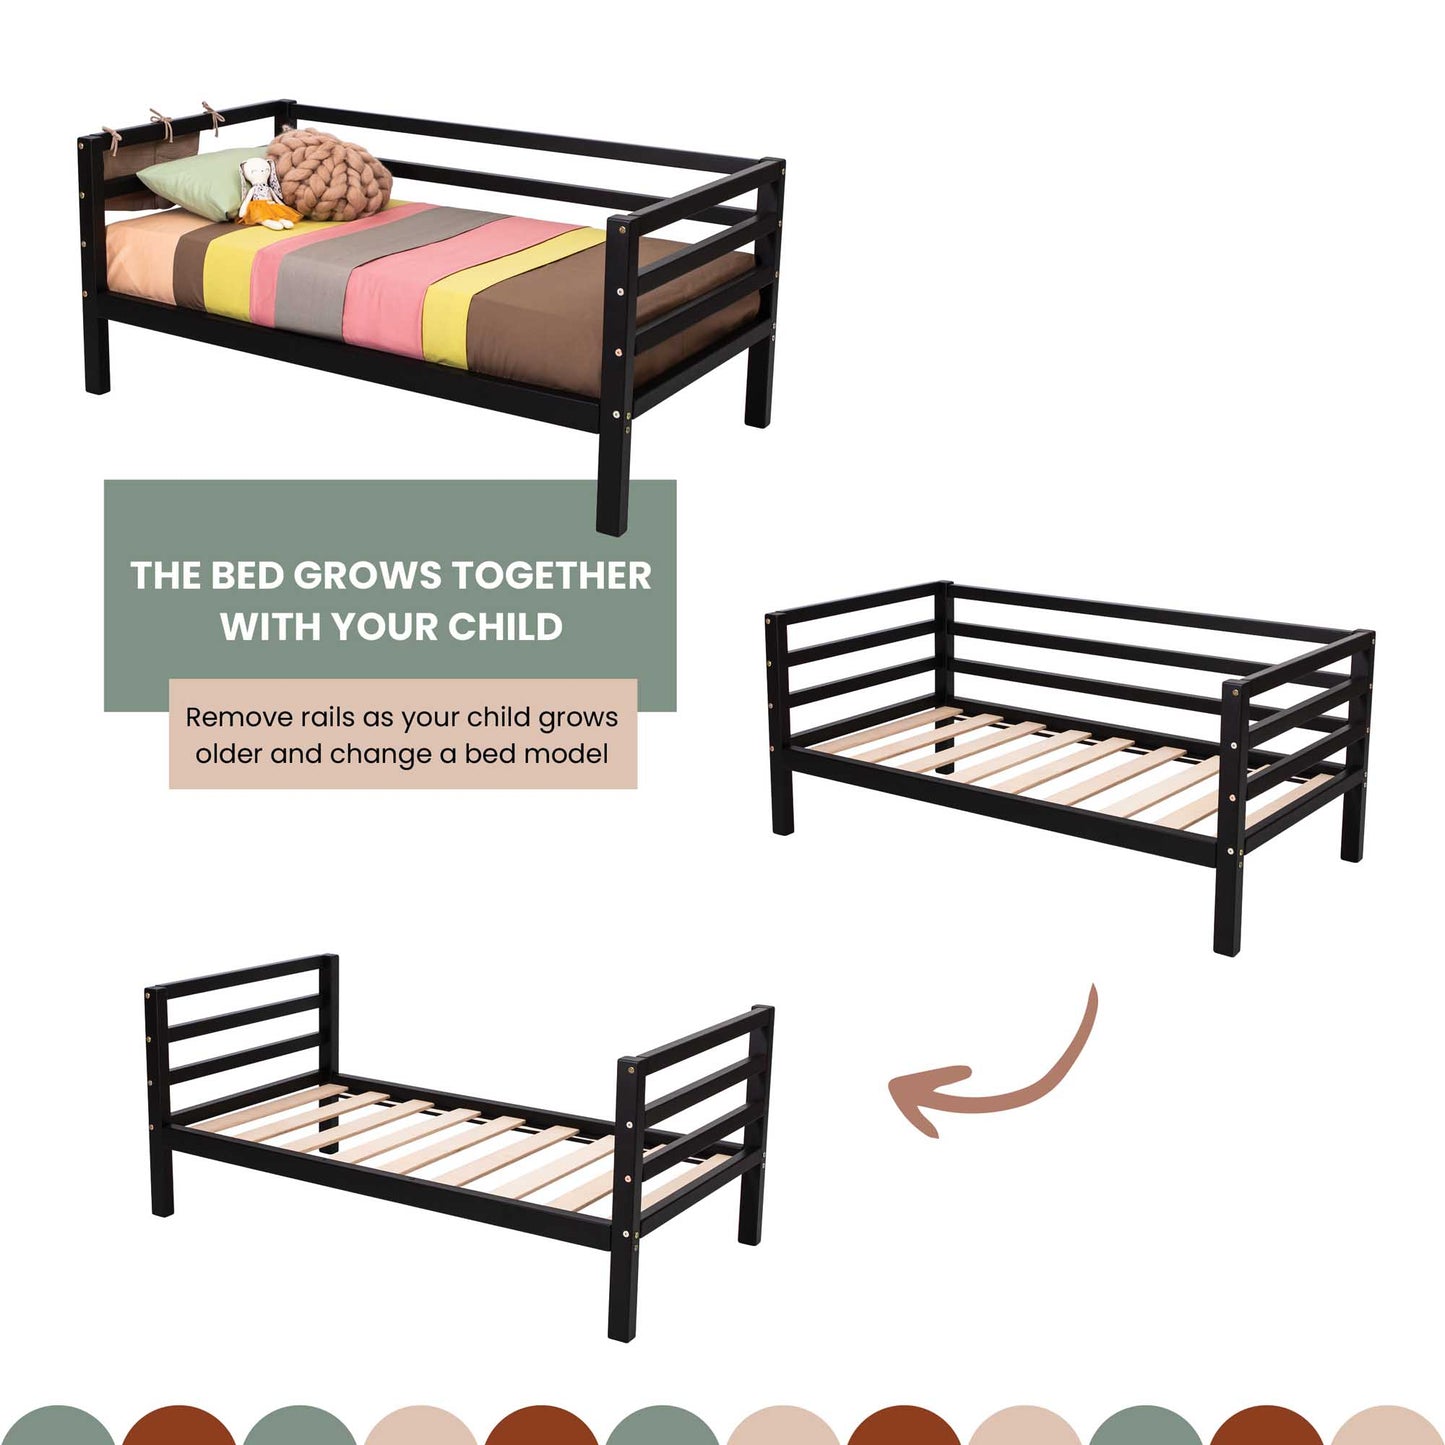 The Sweet Home From Wood kids' bed on legs with a 3-sided horizontal rail grows together with the footboard, making it an ideal toddler bed for girls.